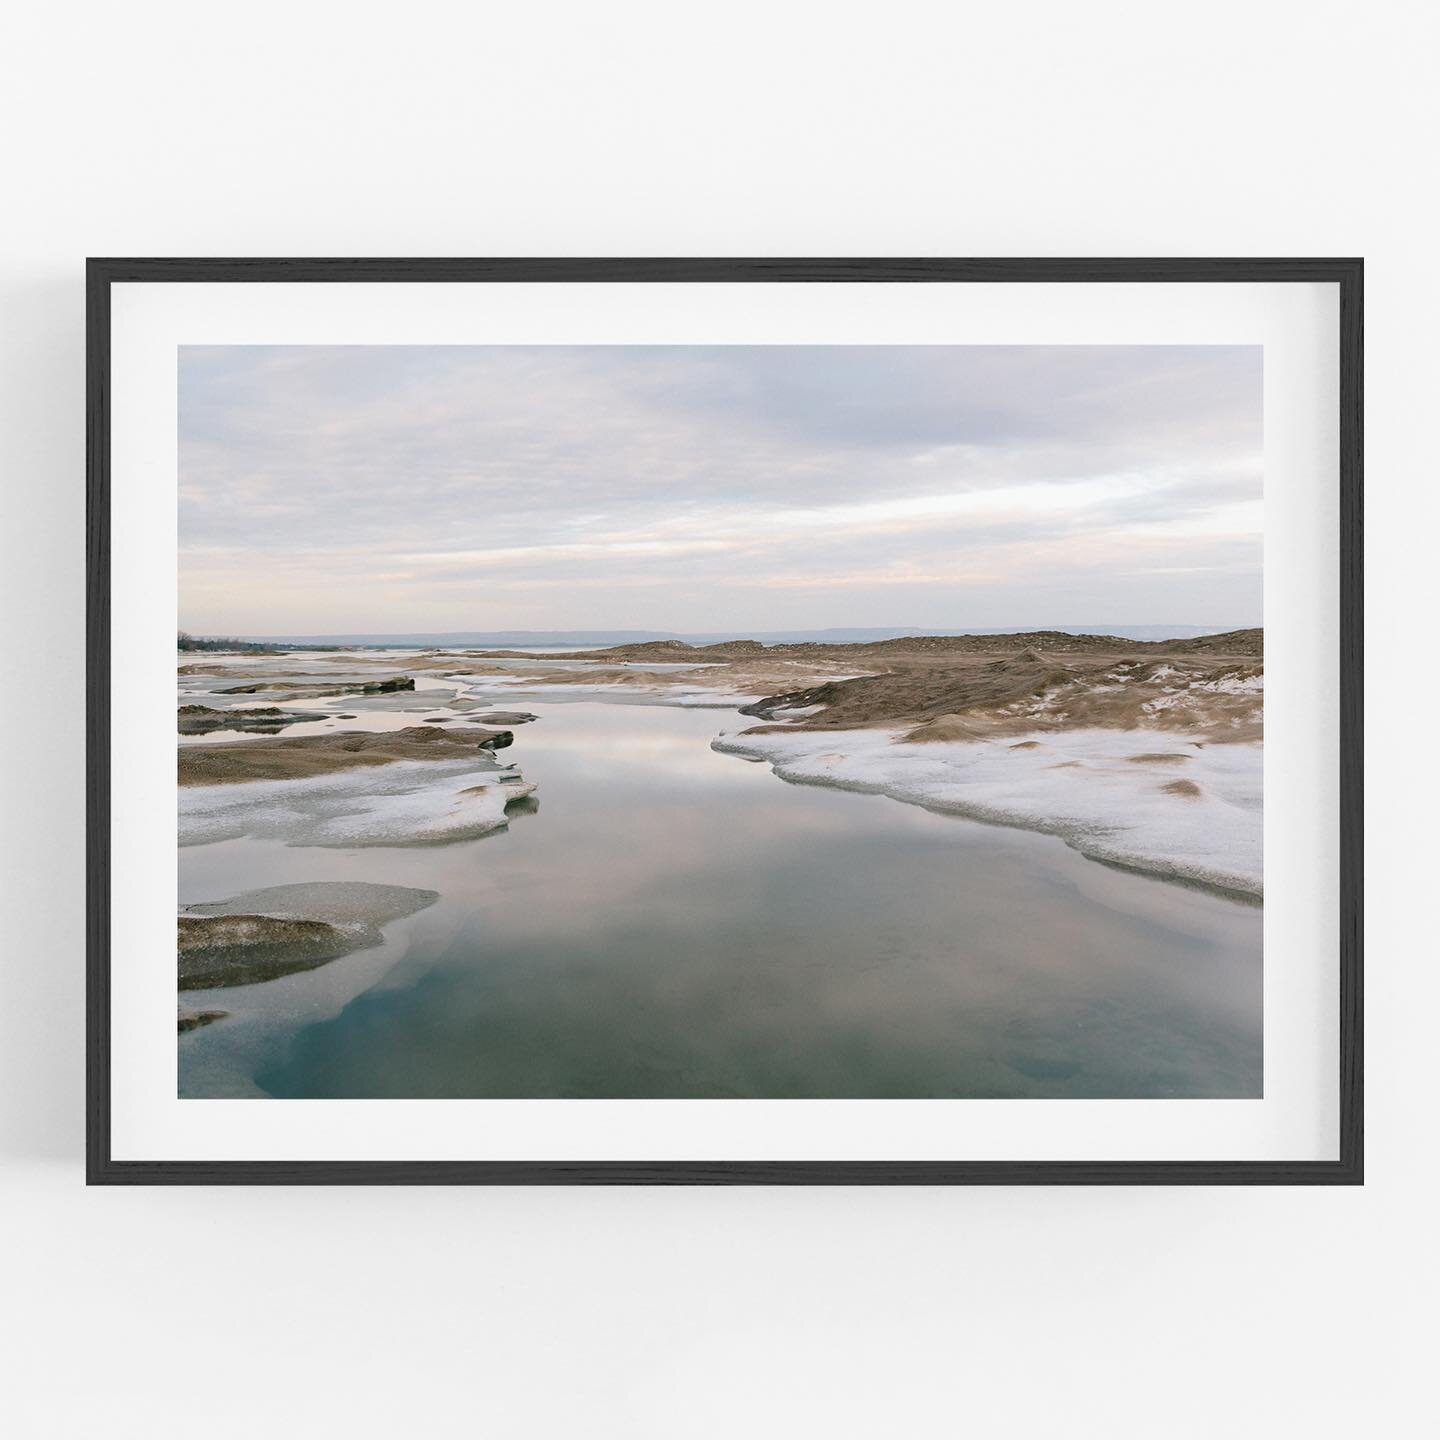 Another sneak peek from the winter print collection launching tomorrow!
.
Winter #12 framed in black with a white paper border.
.
This one might just be my favourite of the whole set, maybe just because it was awesome getting to stand in a river insi